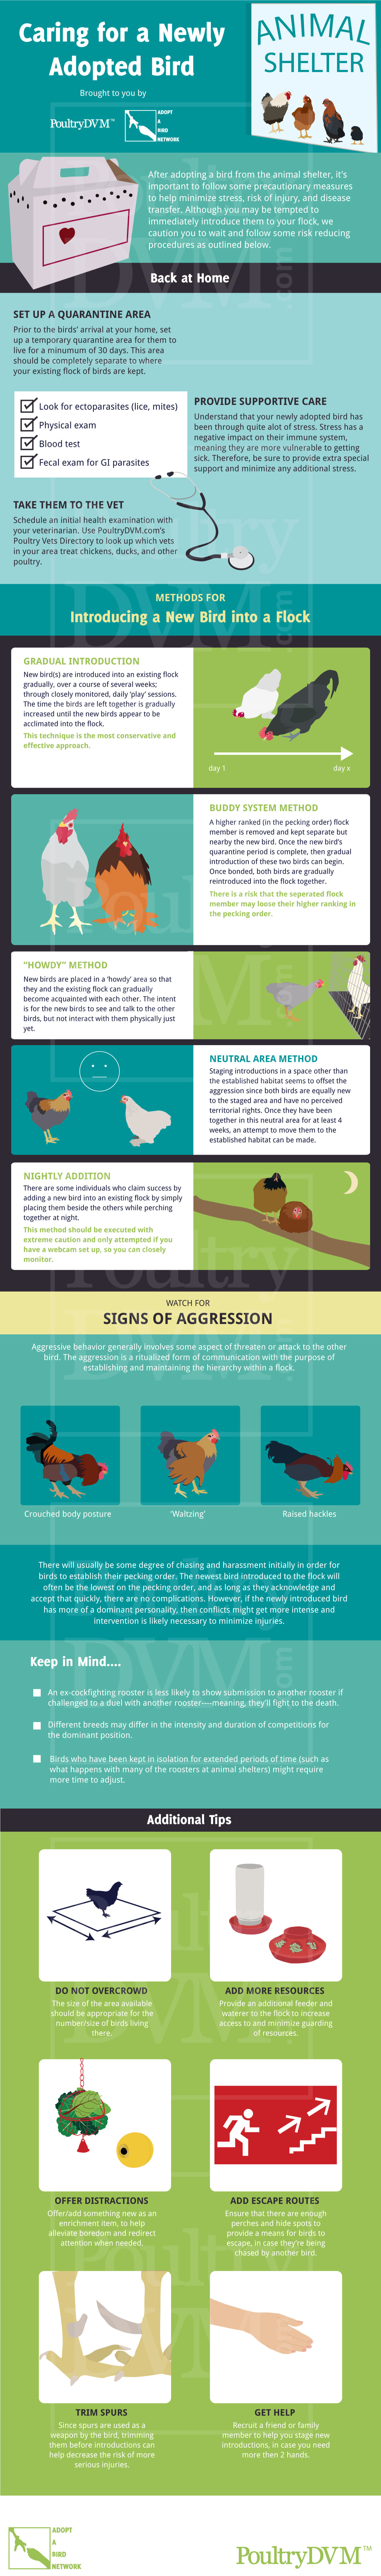 PoultryDVM - Caring for your Newly Adopted Chicken